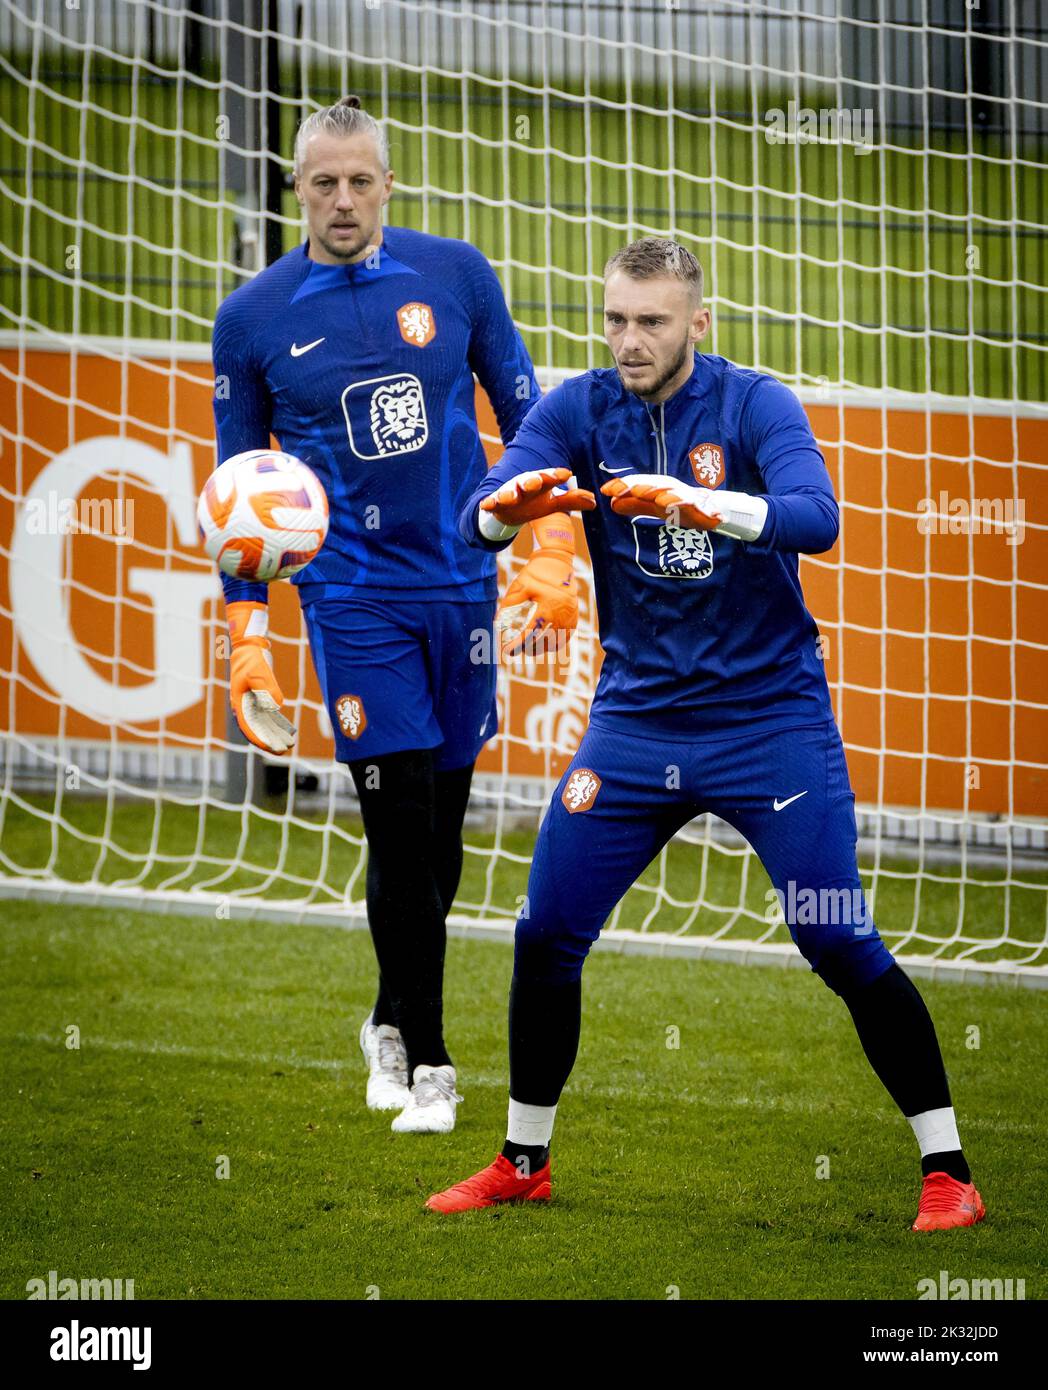 ZEIST - Remko Pasveer and Jasper Cillessen during a training session of the Dutch national team at the KNVB Campus on September 24, 2022 in Zeist, the Netherlands. The Dutch national team is preparing for the UEFA Nations League match against Belgium. KOEN VAN WEEL Stock Photo